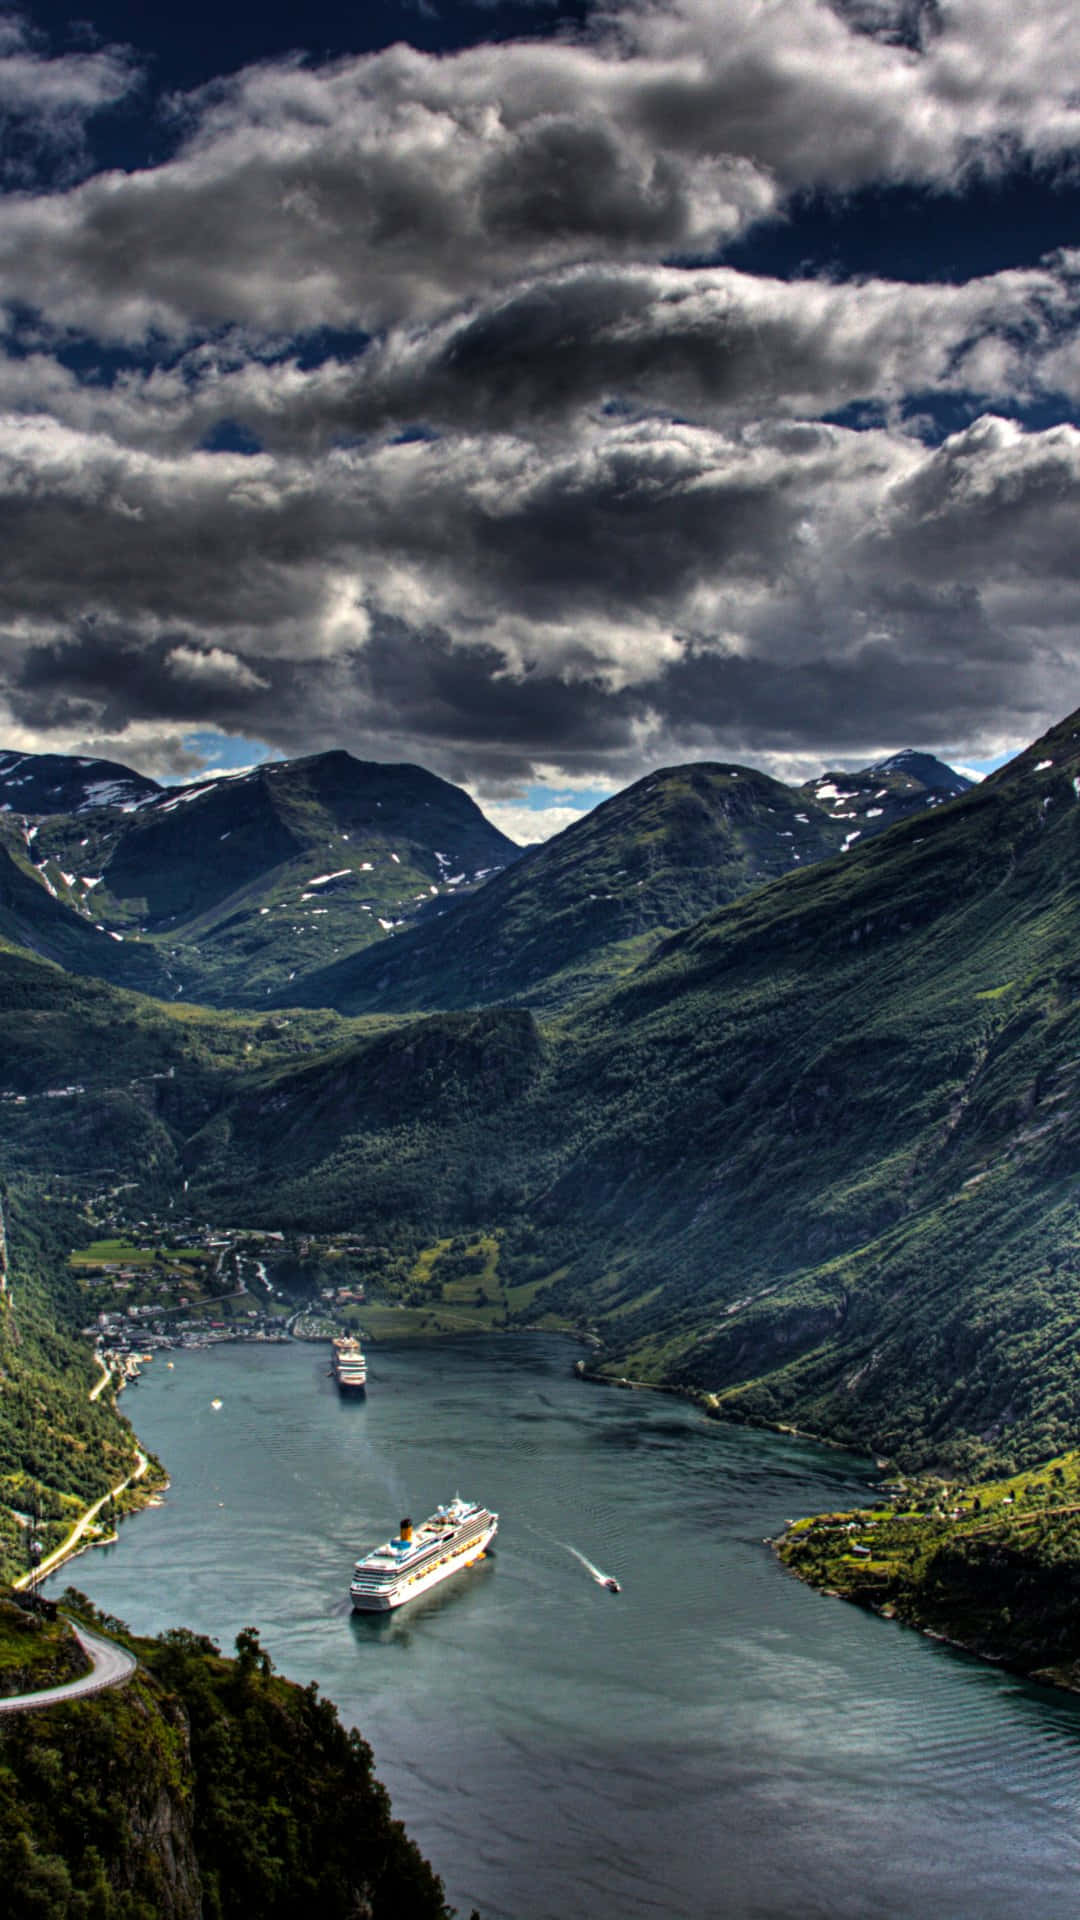 A view of Norway's beautiful fjords